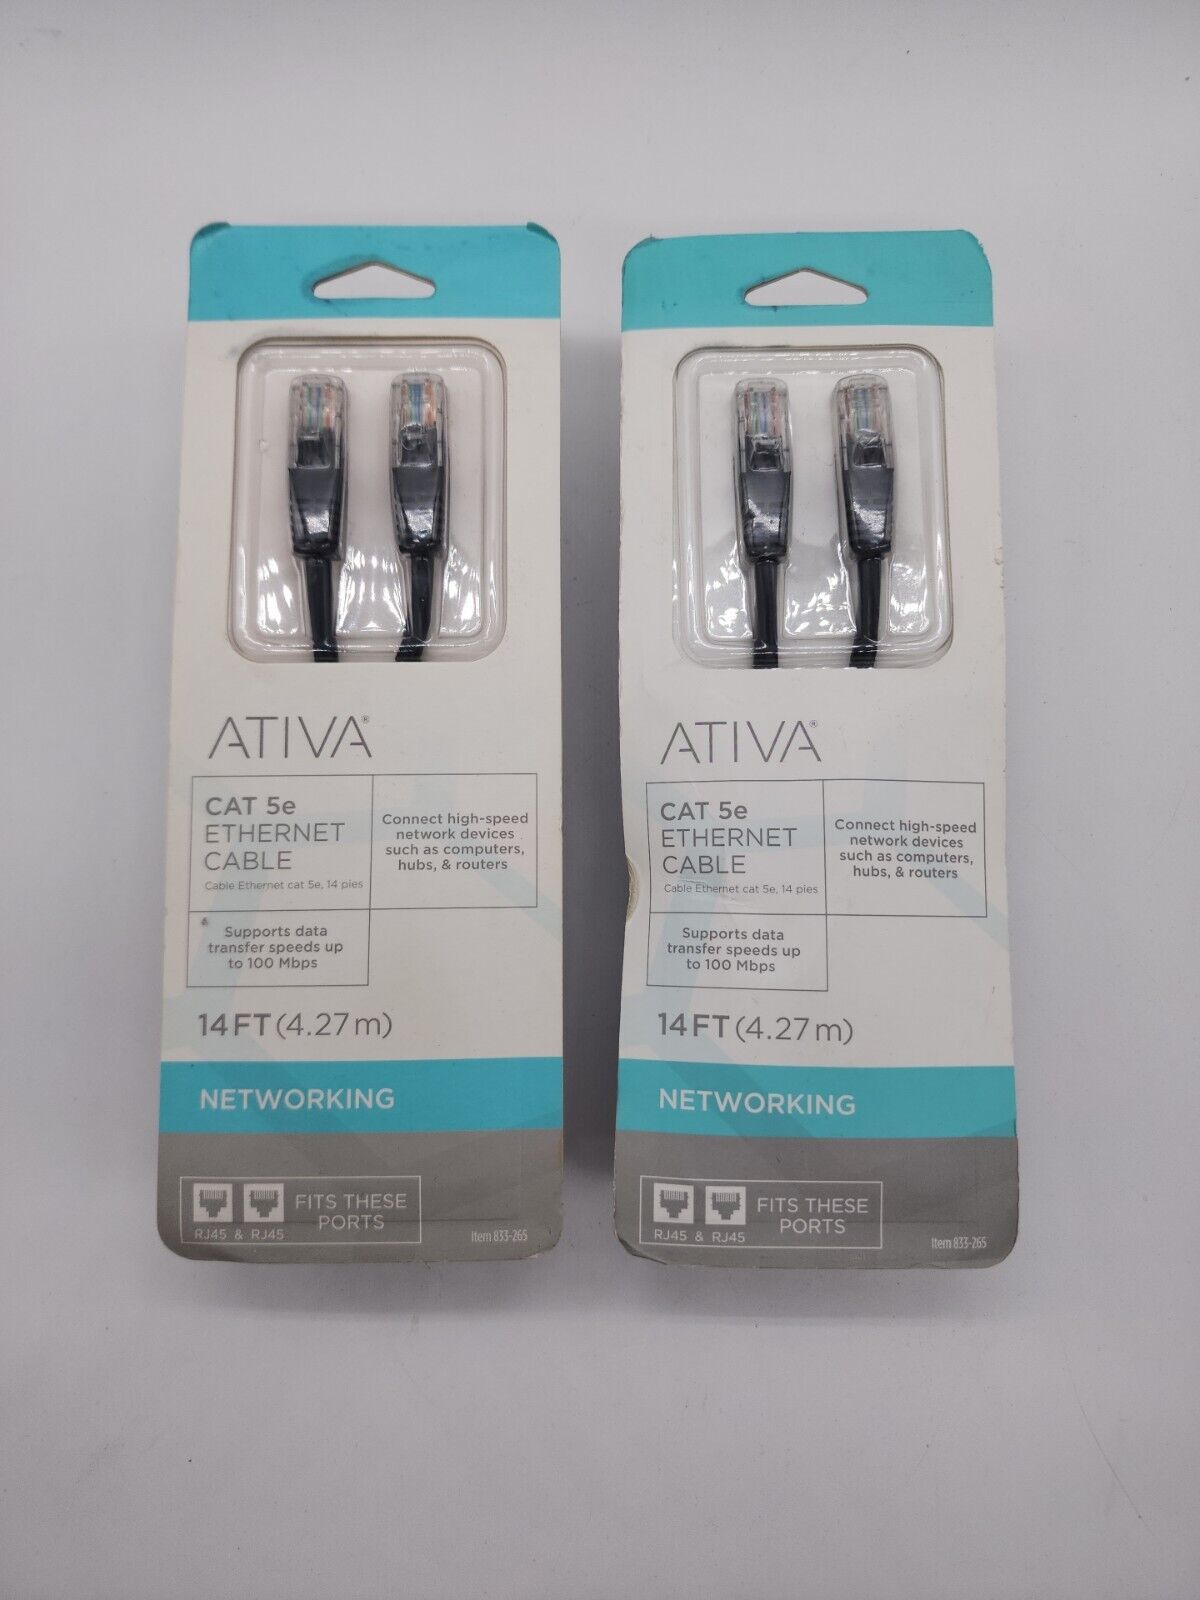 Ativa Cat5e Ethernet Cable 14FT  4.27M Lot Of 2